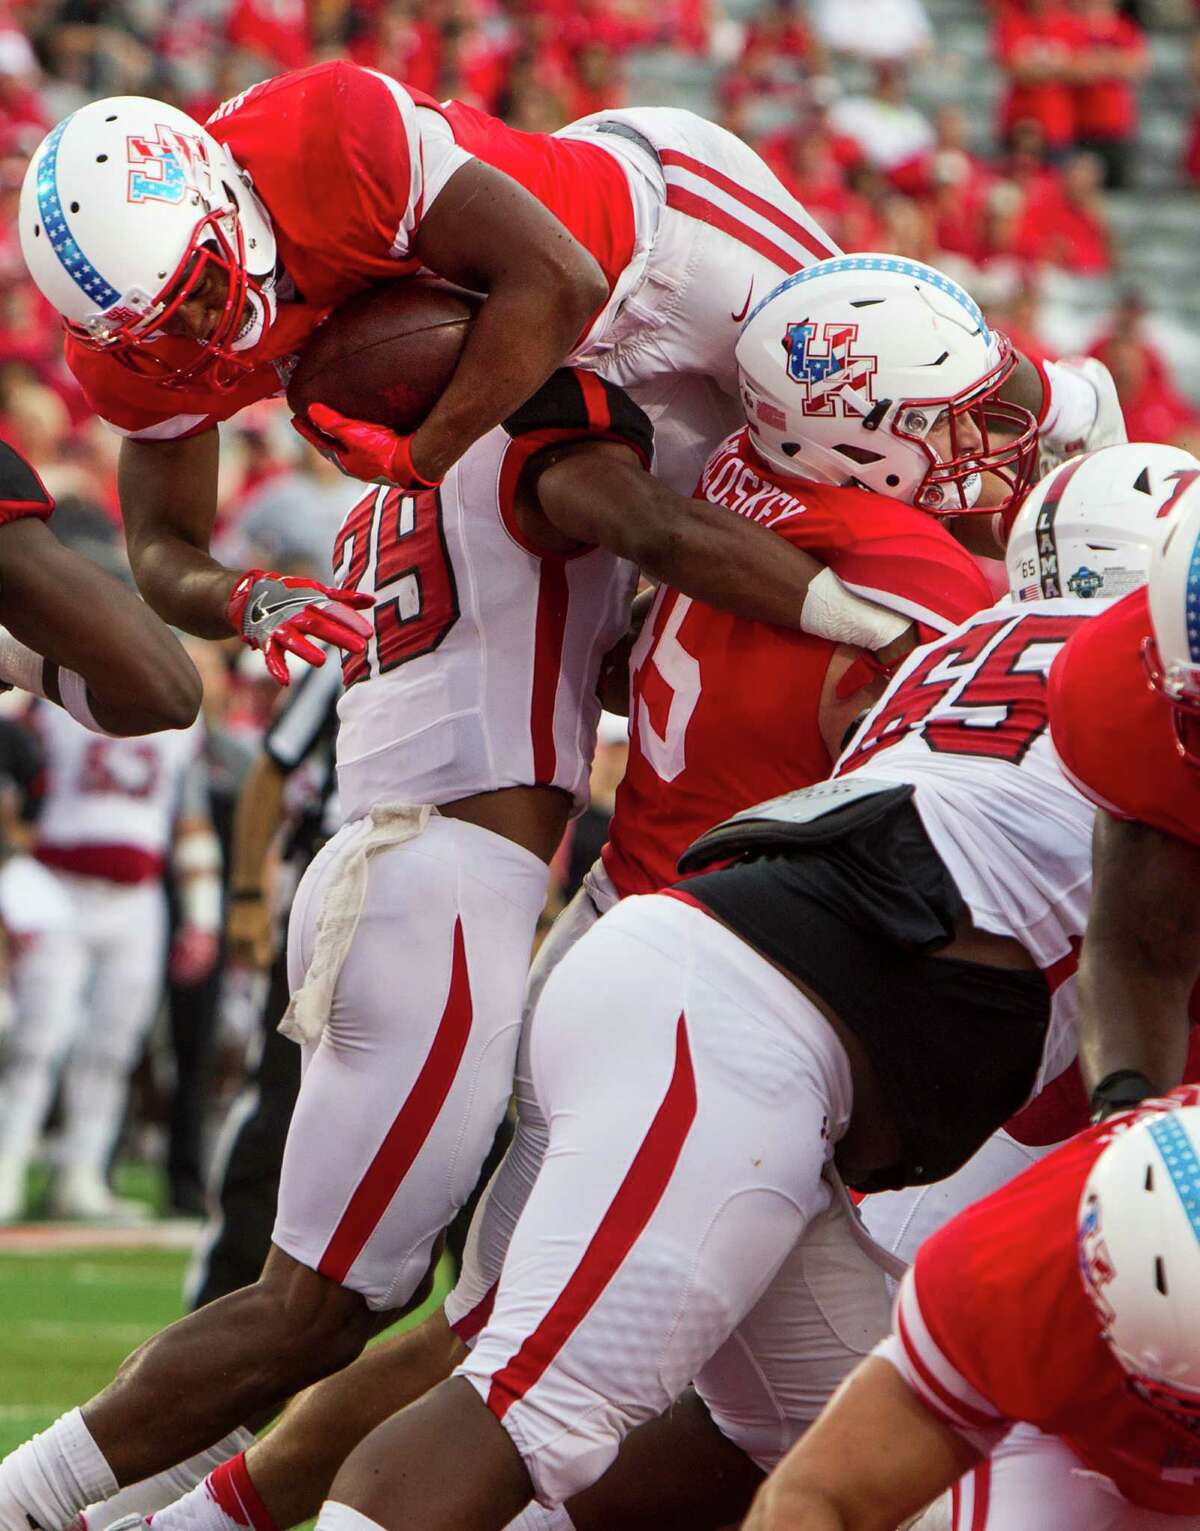 Houston running back Kevin Justice (32) dives over the goal line for a 1-yard touchdown run against Lamar during the first quarter of an NCAA football game at TDECU Stadium on Saturday, Sept. 10, 2016, in Houston.